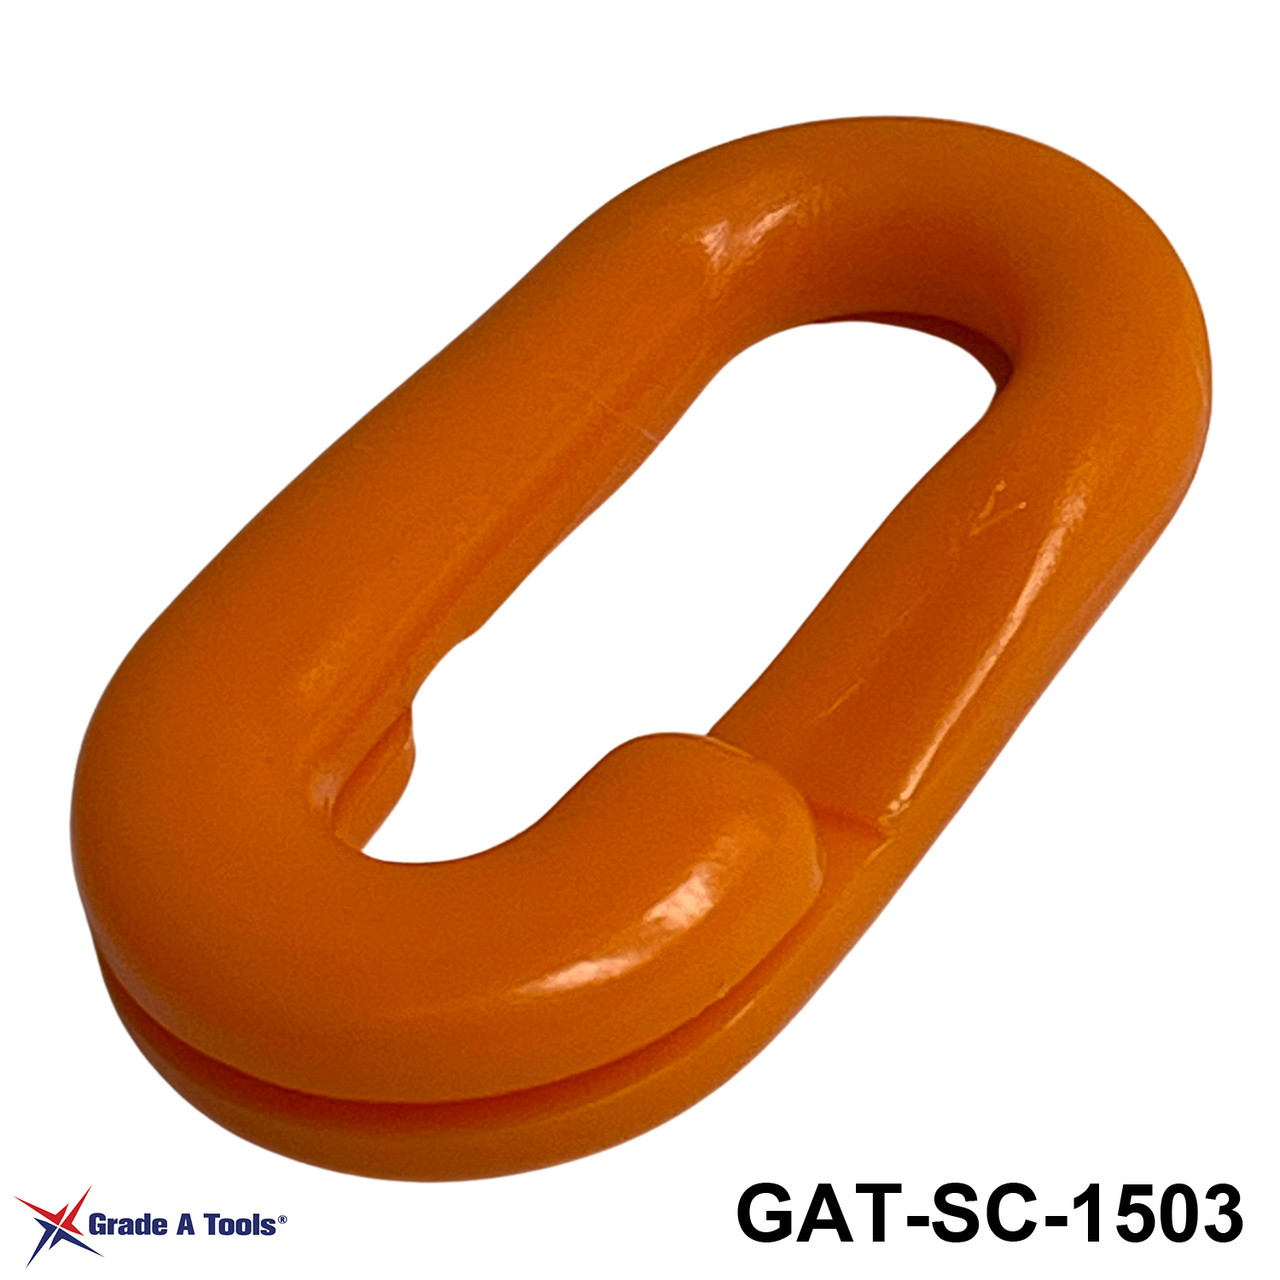 Plastic Safety Chain Orange Repair  joining  Link connector  1-5/8" X 1/4" (41mm X 6mm) C